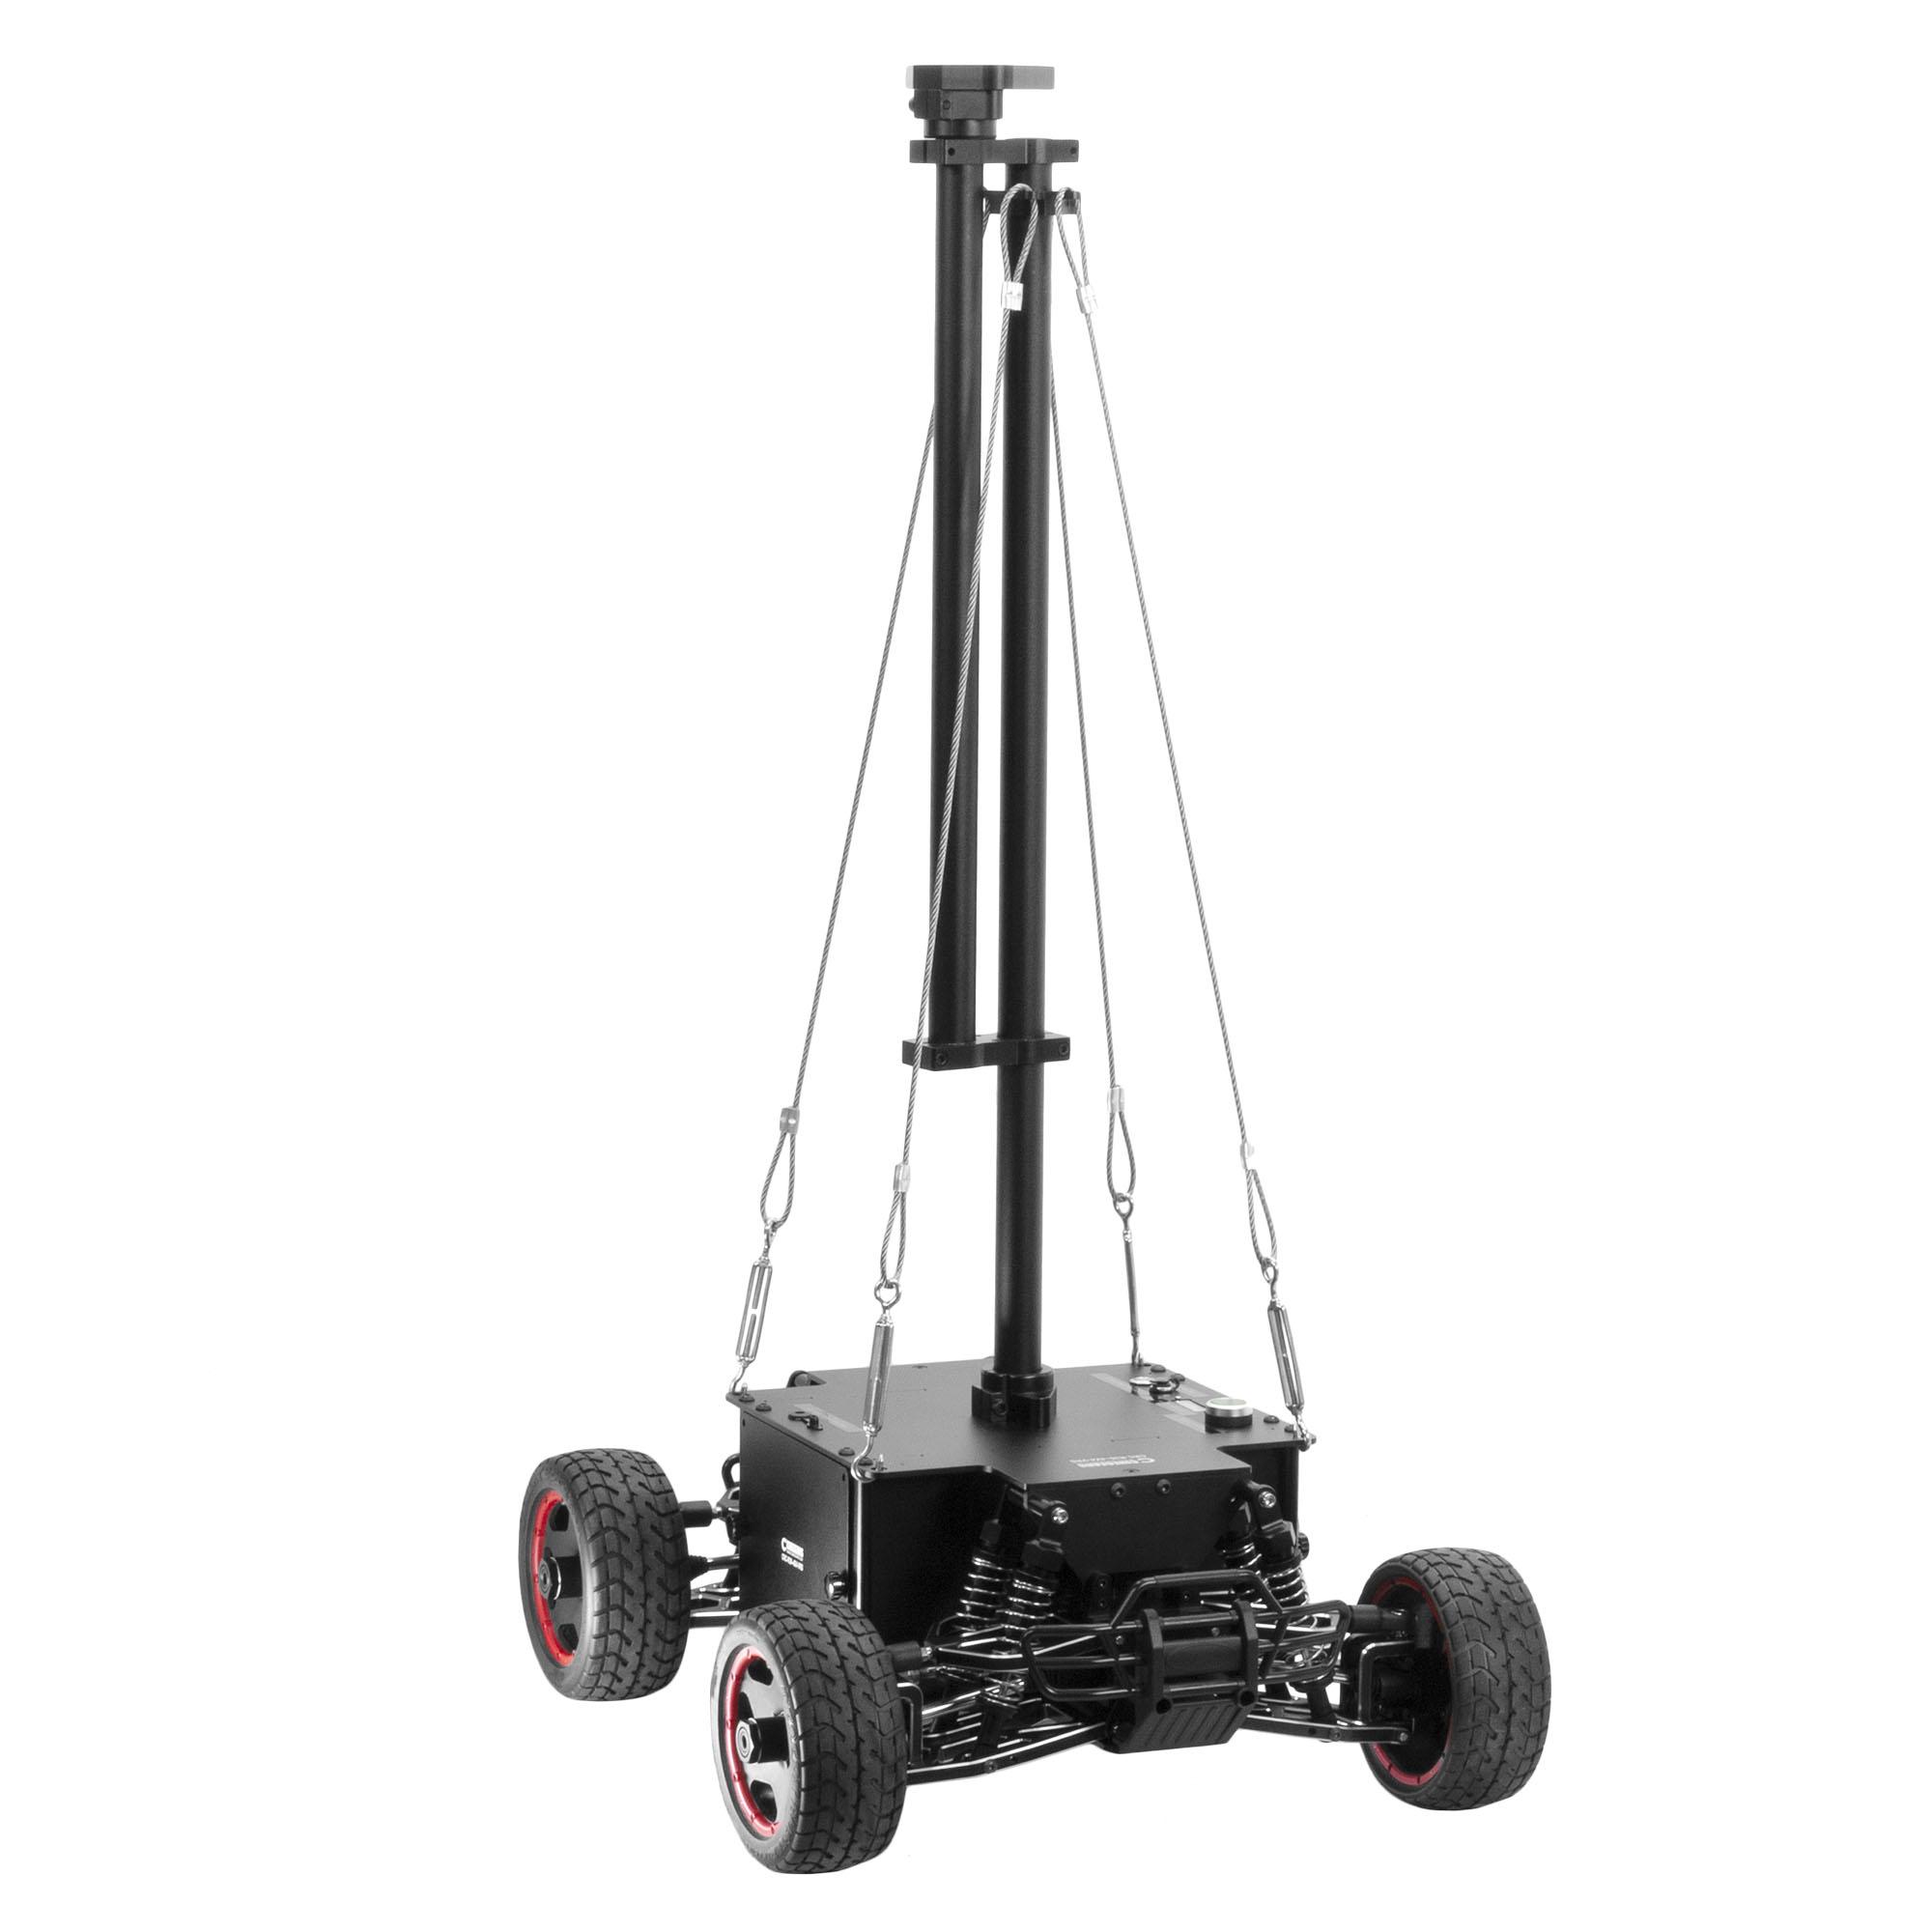 Top Stand for VR Cube RC Gimbal Car